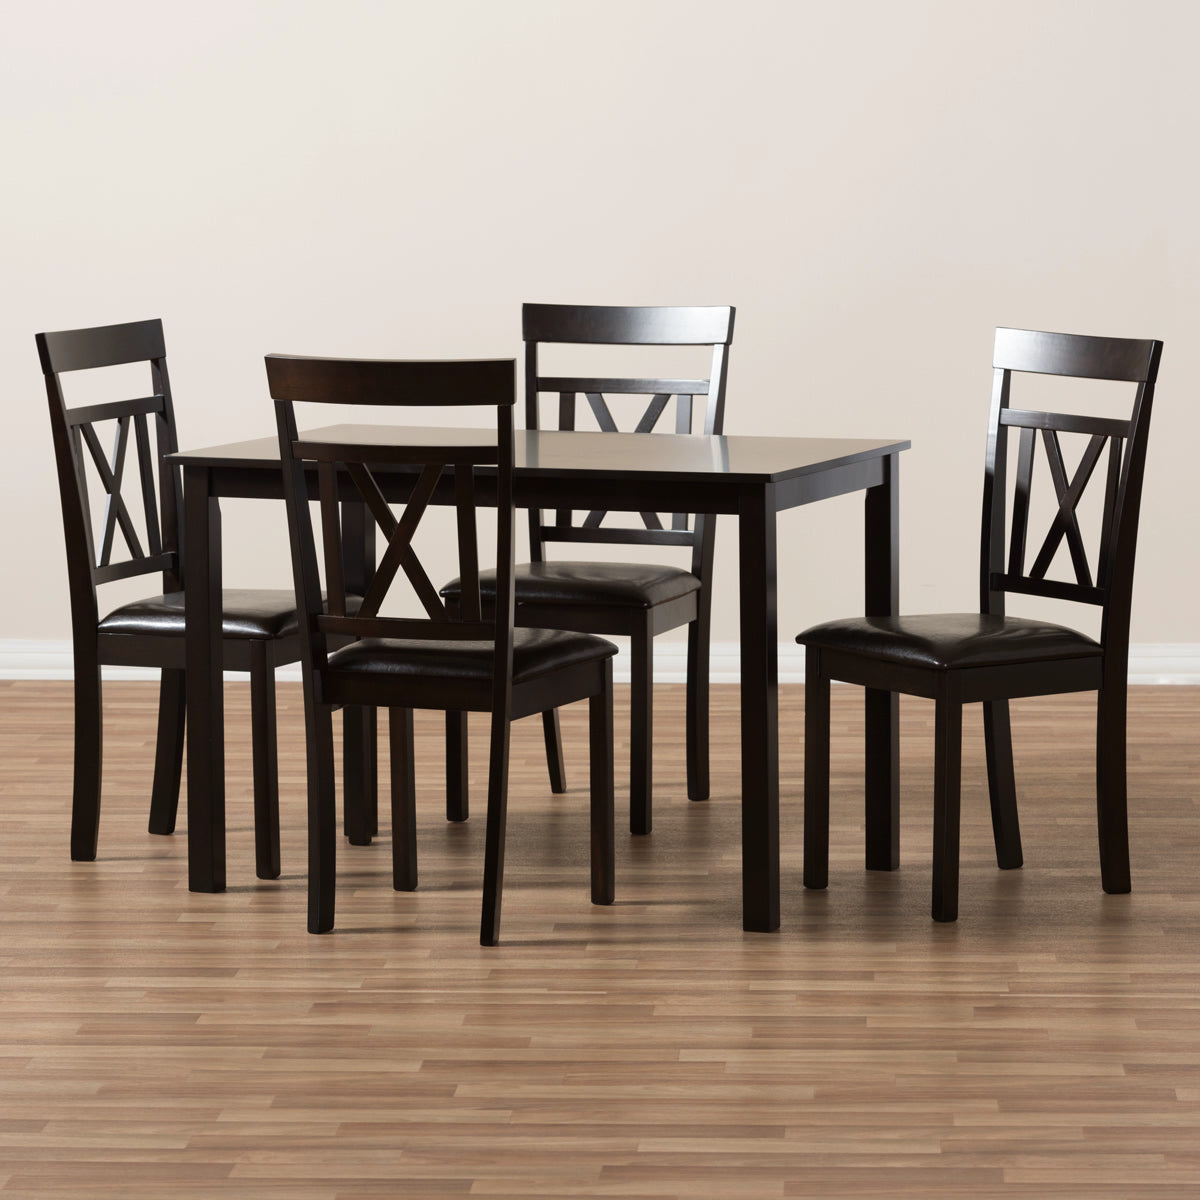 Baxton Studio Rosie Modern and Contemporary Dark Brown Faux Leather Upholstered 5-Piece Dining Set Baxton Studio-0-Minimal And Modern - 6